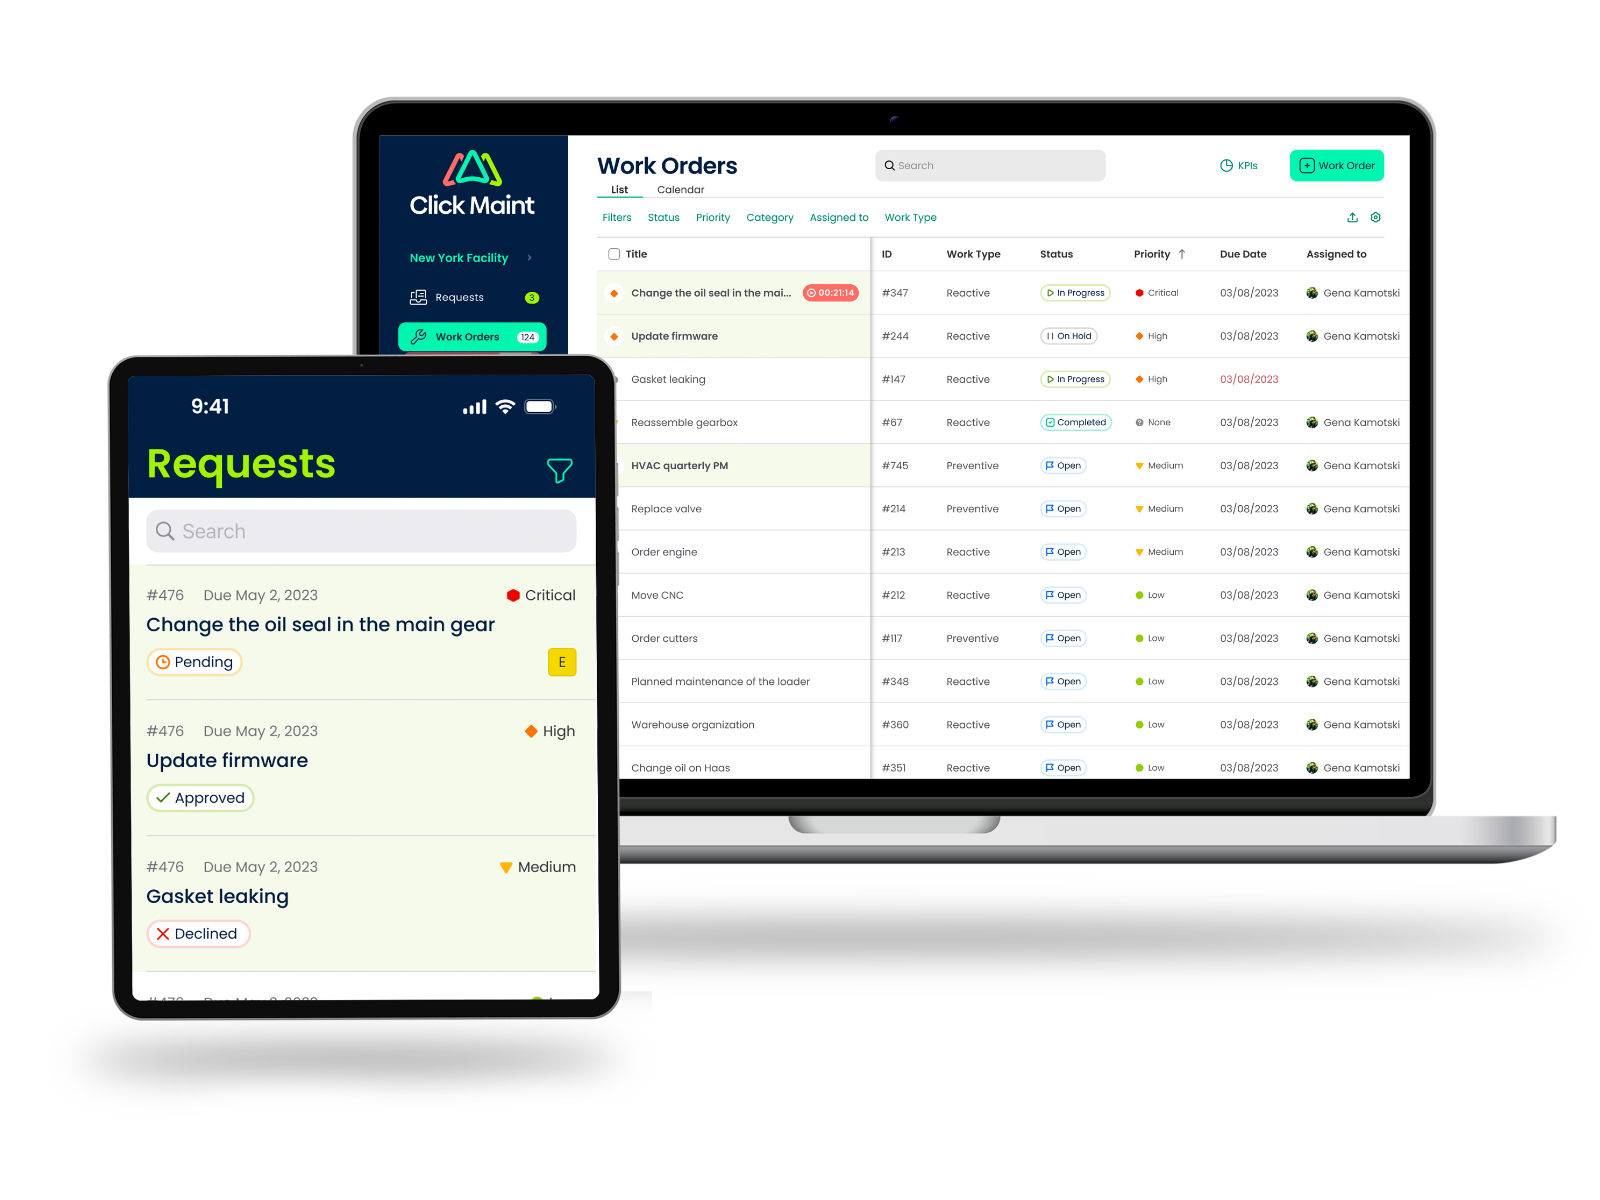 Work Orders & Requests - Easily manage all maintenance requests and work orders from your desktop or mobile device. Incoming requests are reviewed before creating work orders. Configure email and push notifications settings ensuring nothing is missed.